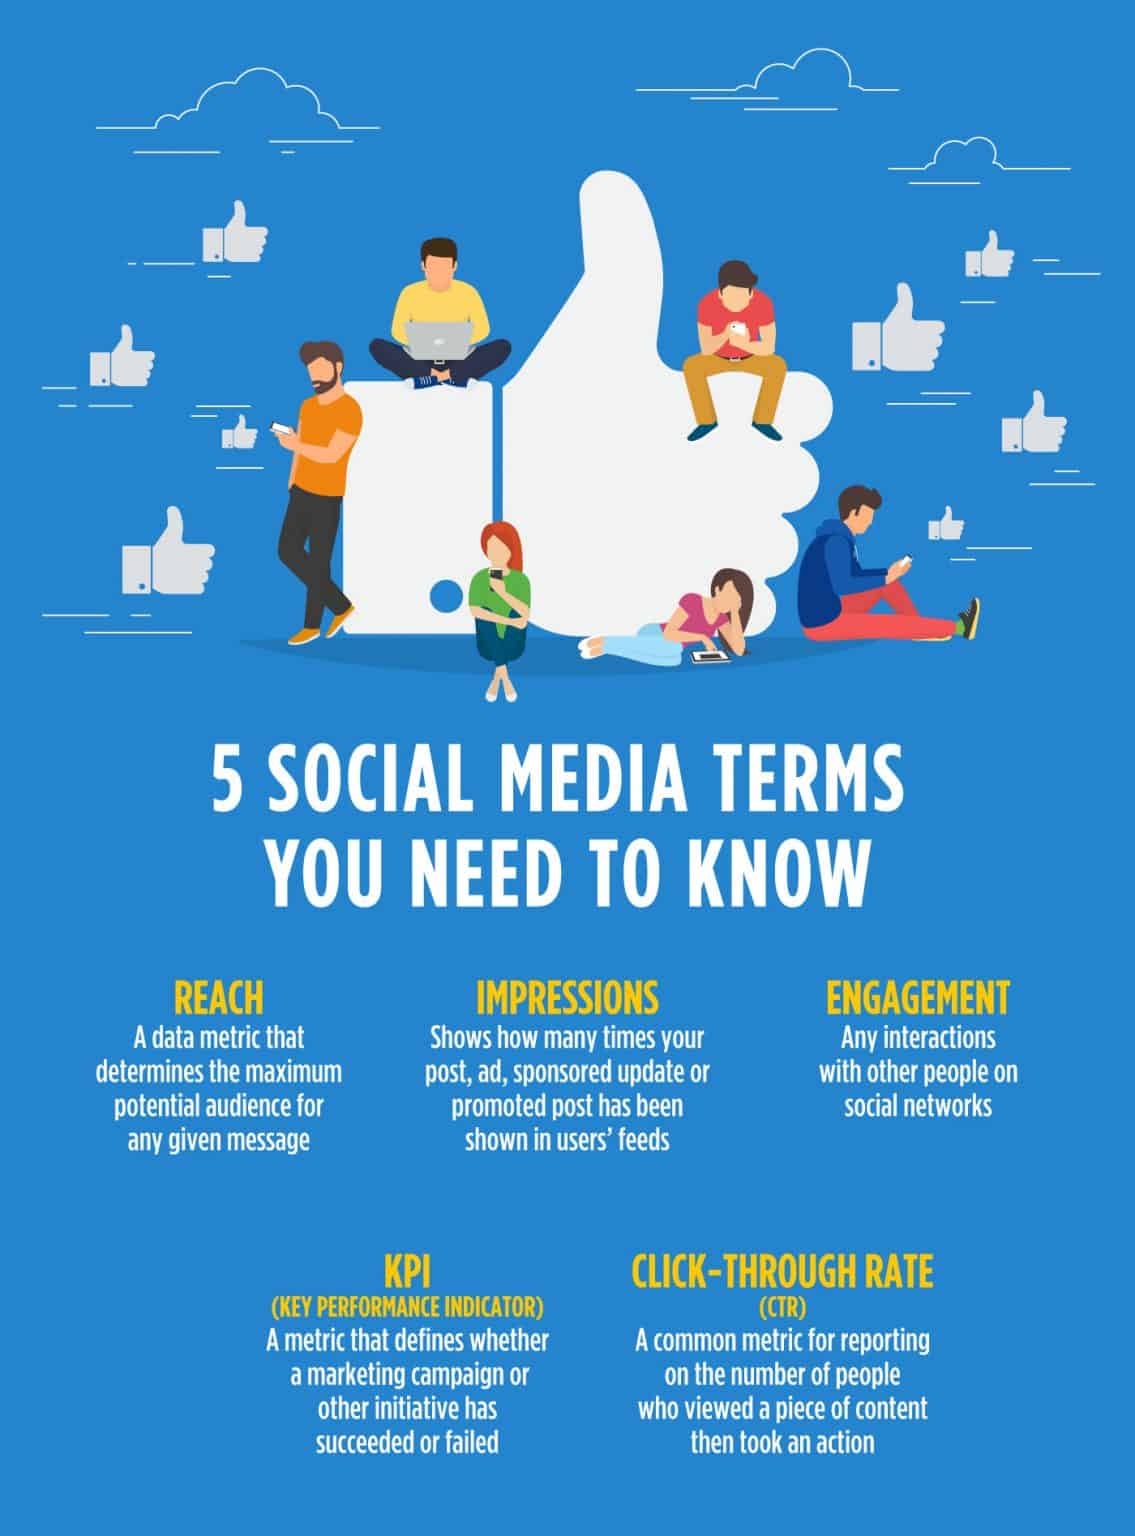 The Social Media Glossary for the CPG Marketing Sector